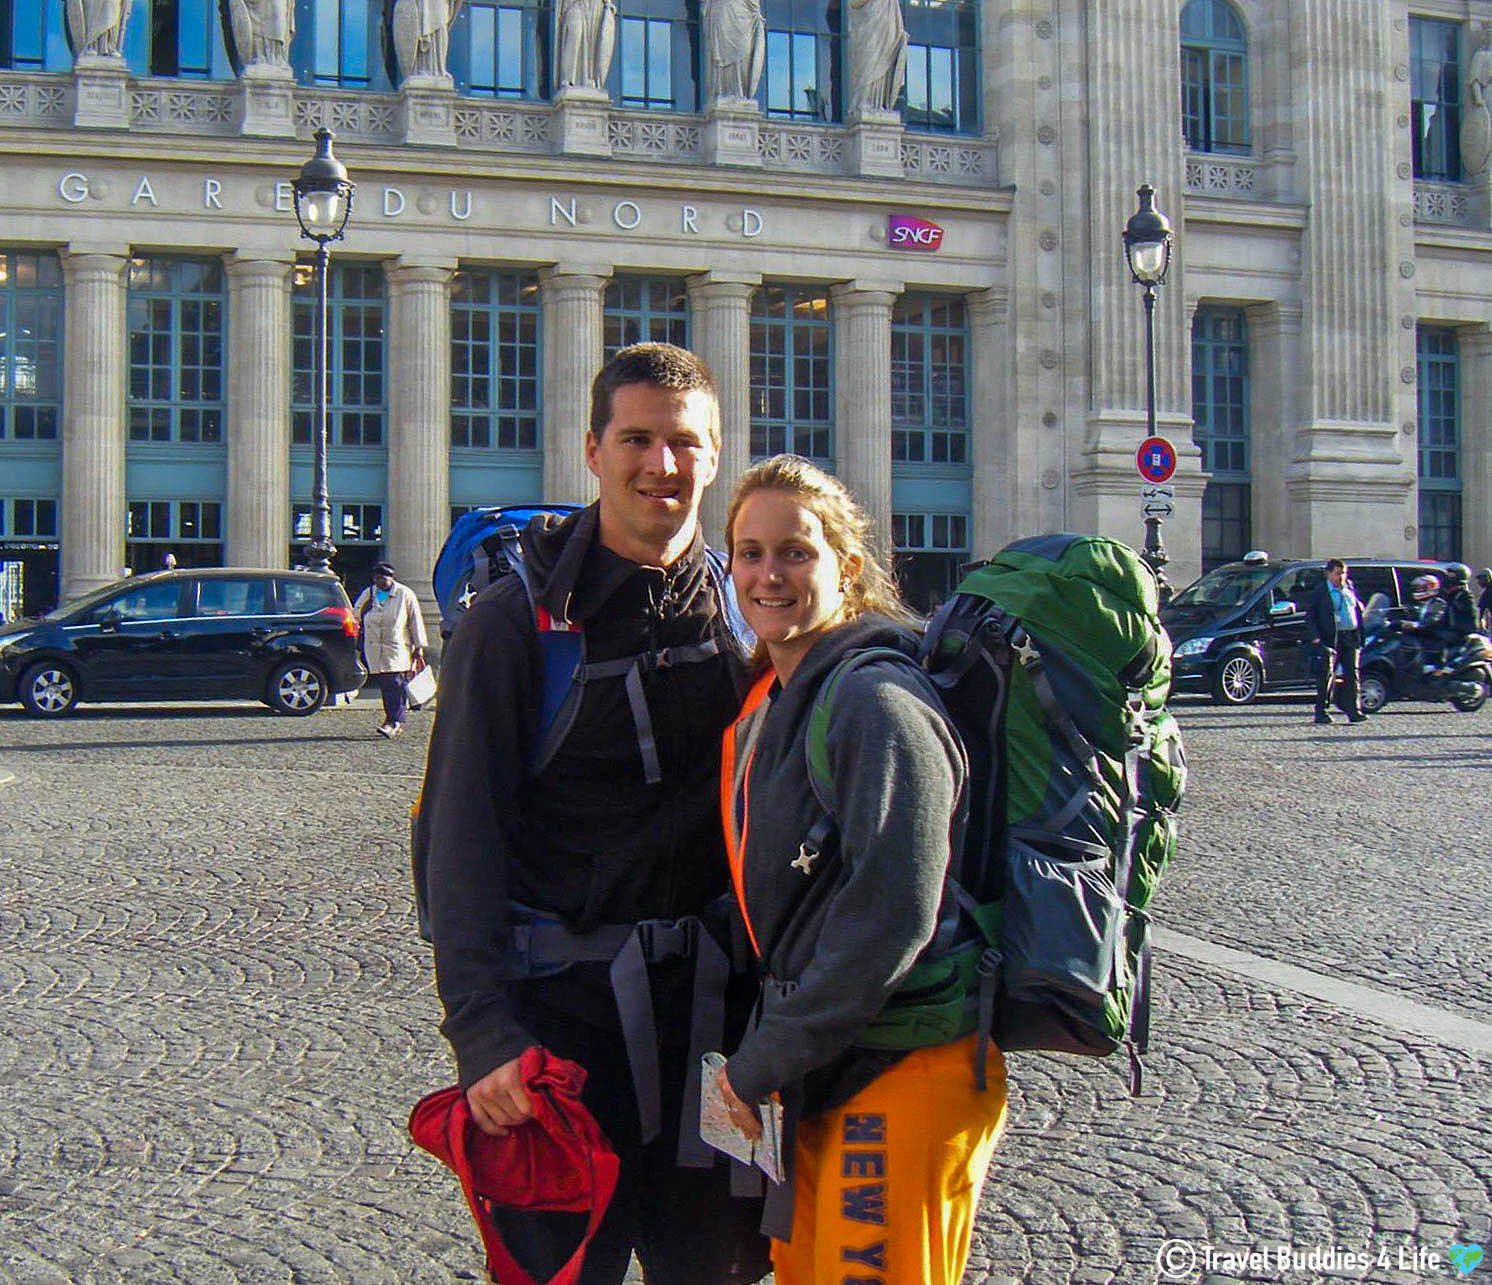 Joey And Ali With Travel Gear Right After Being Pickpocketed In Paris, France